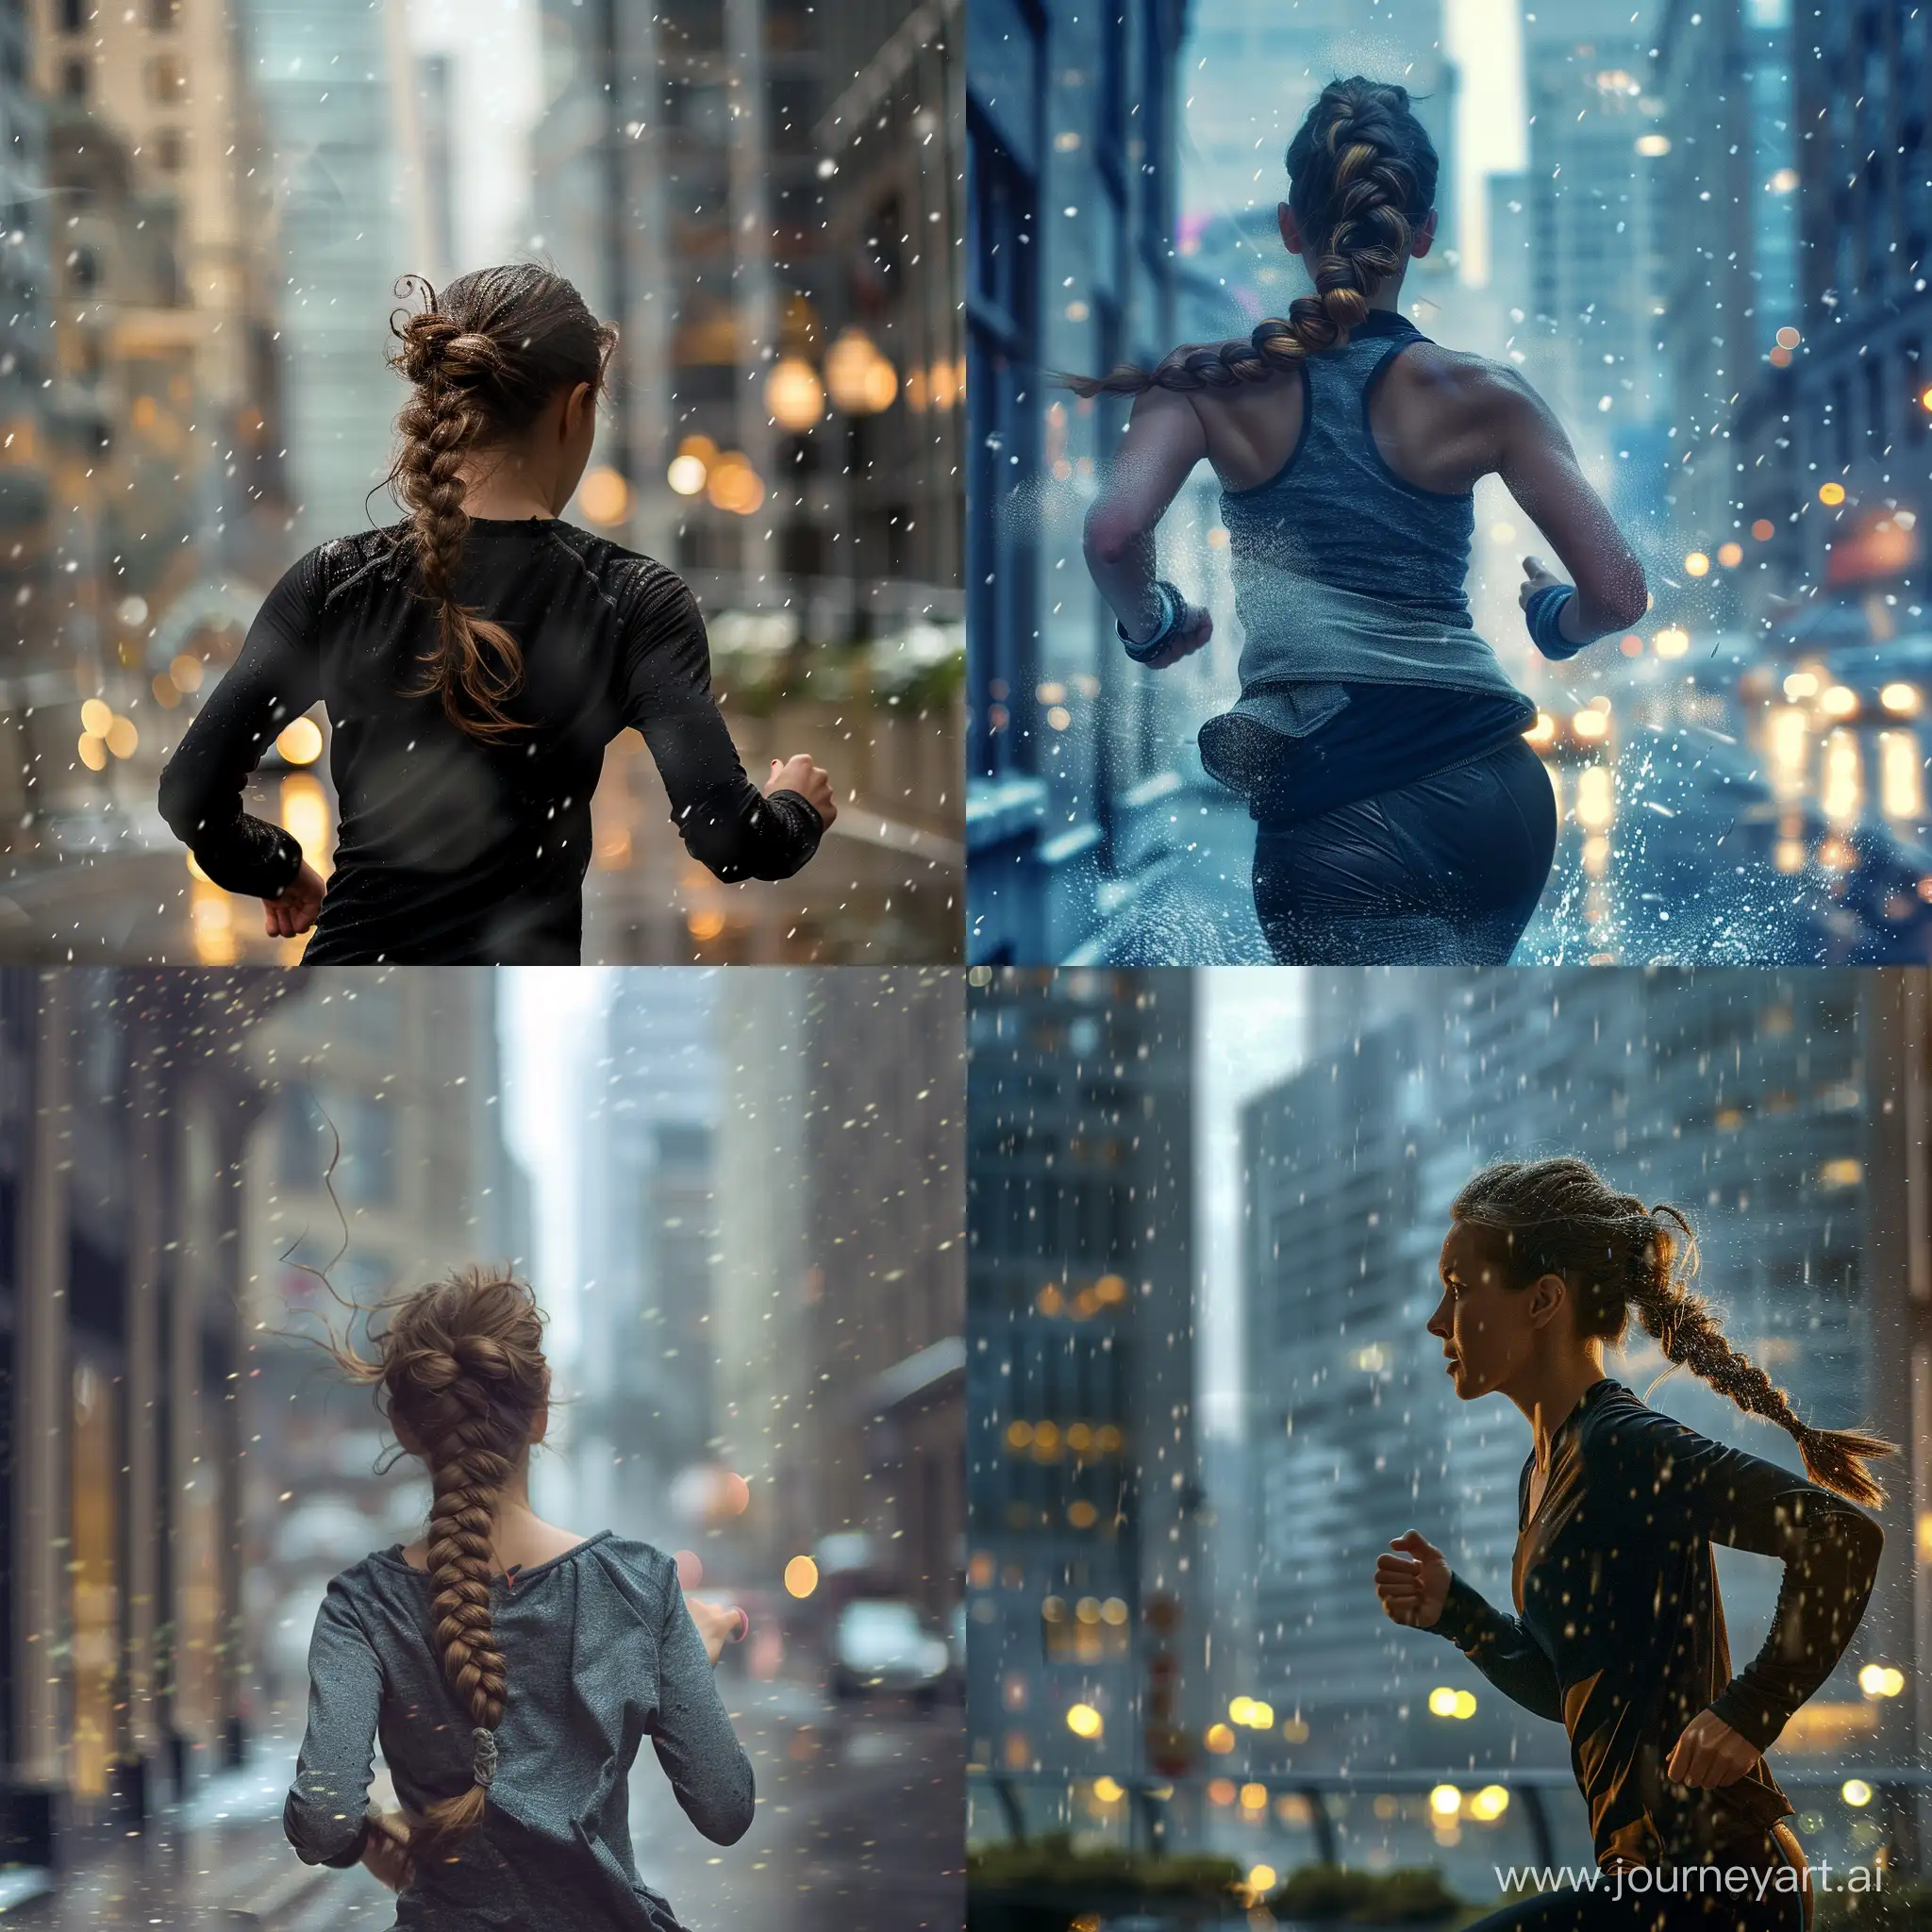 Elegant-Woman-with-French-Braid-Running-in-Rainy-Cityscape